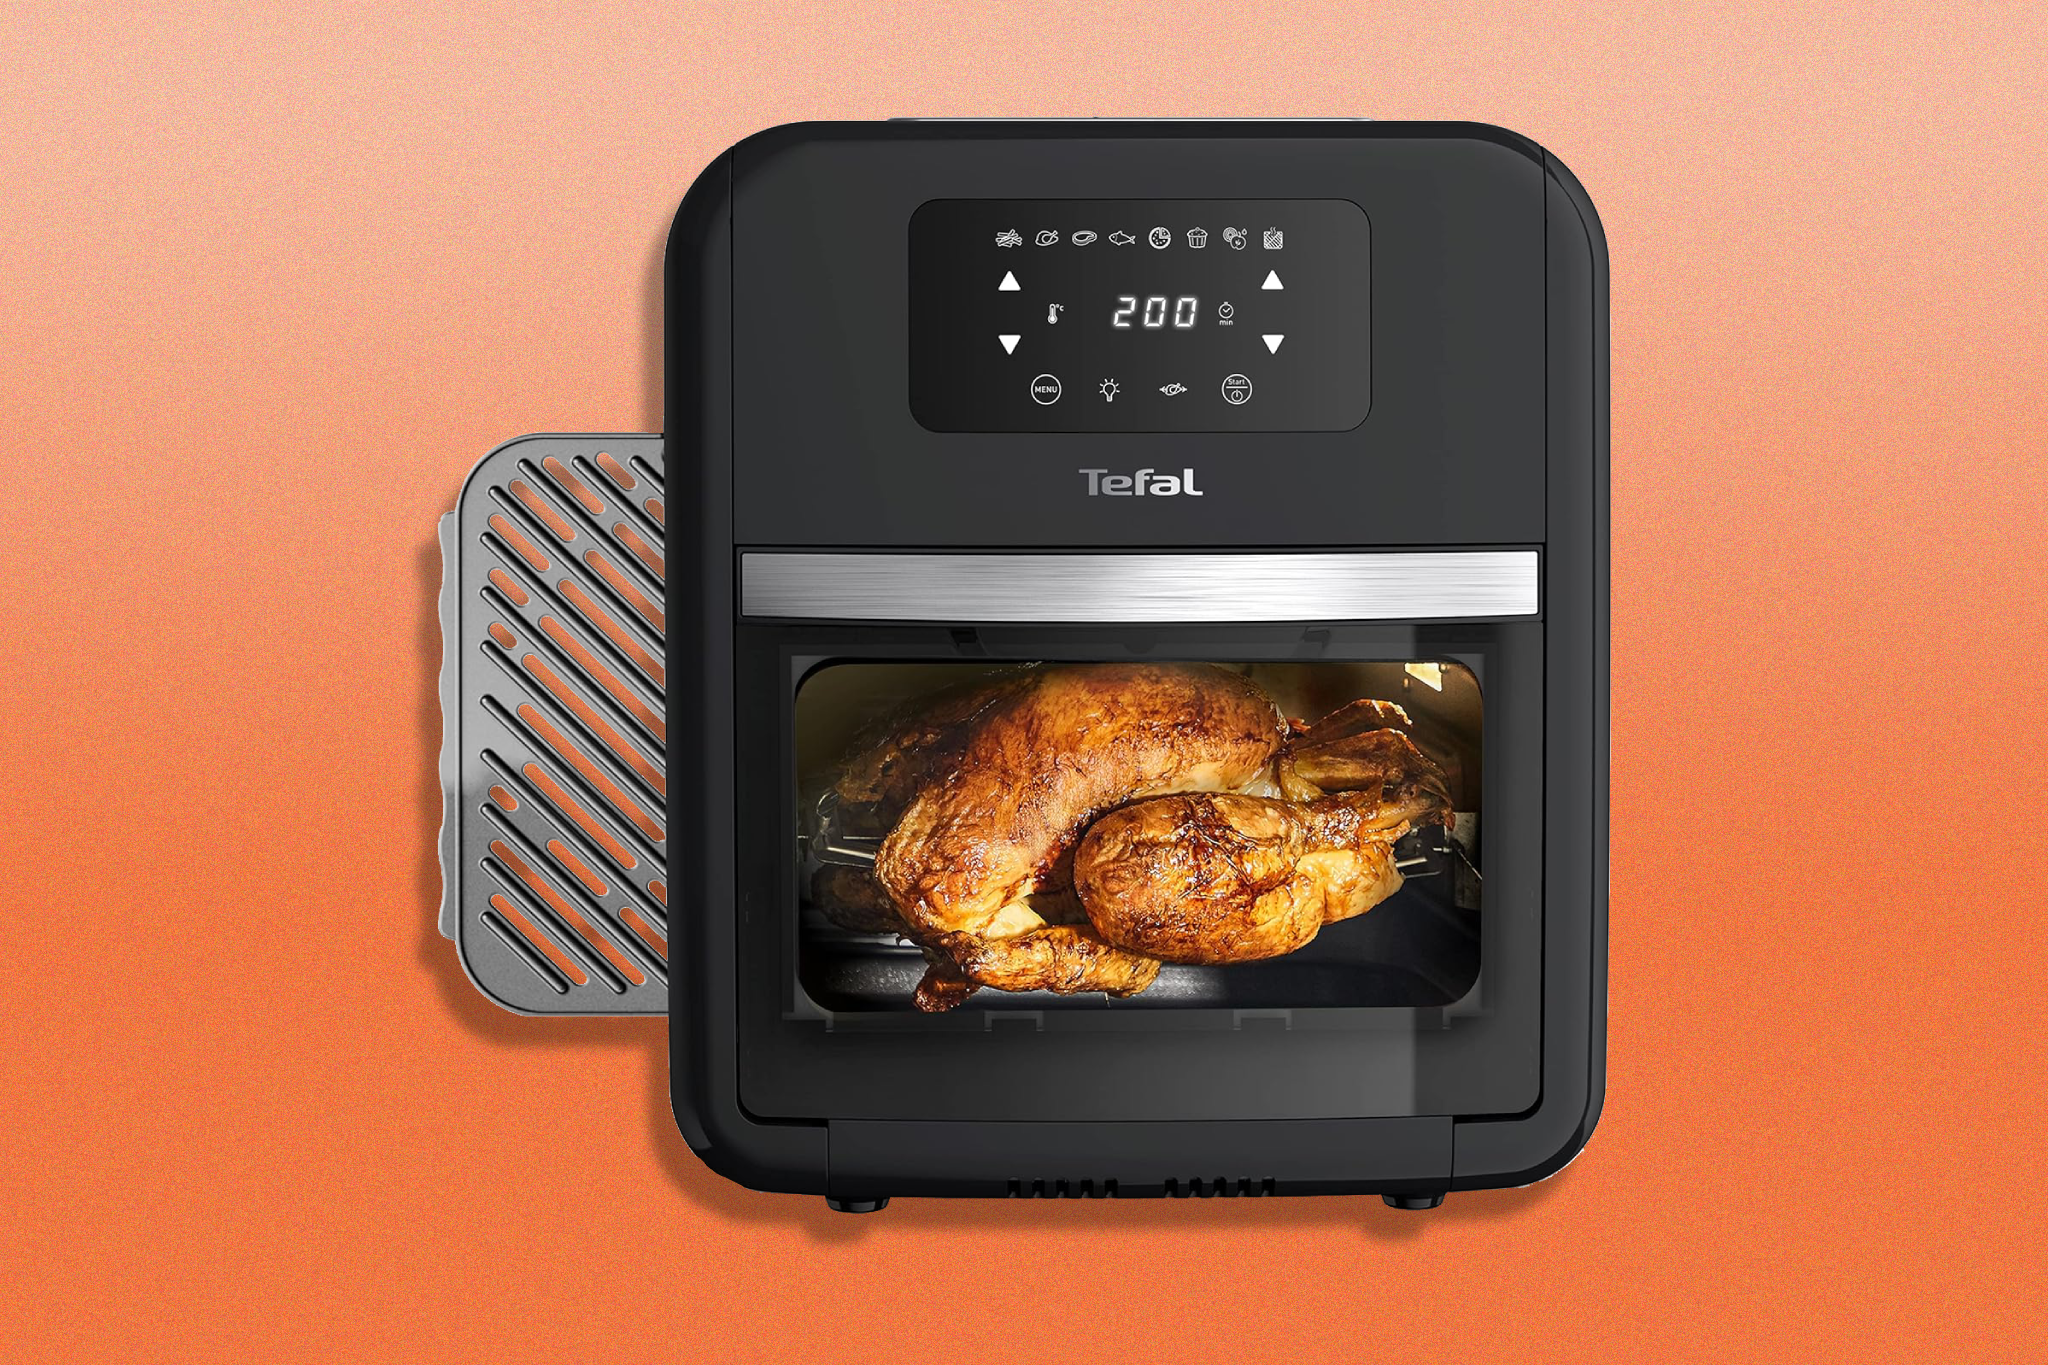 You can grill, dehydrate, toast and even whip up an entire chicken in under an hour